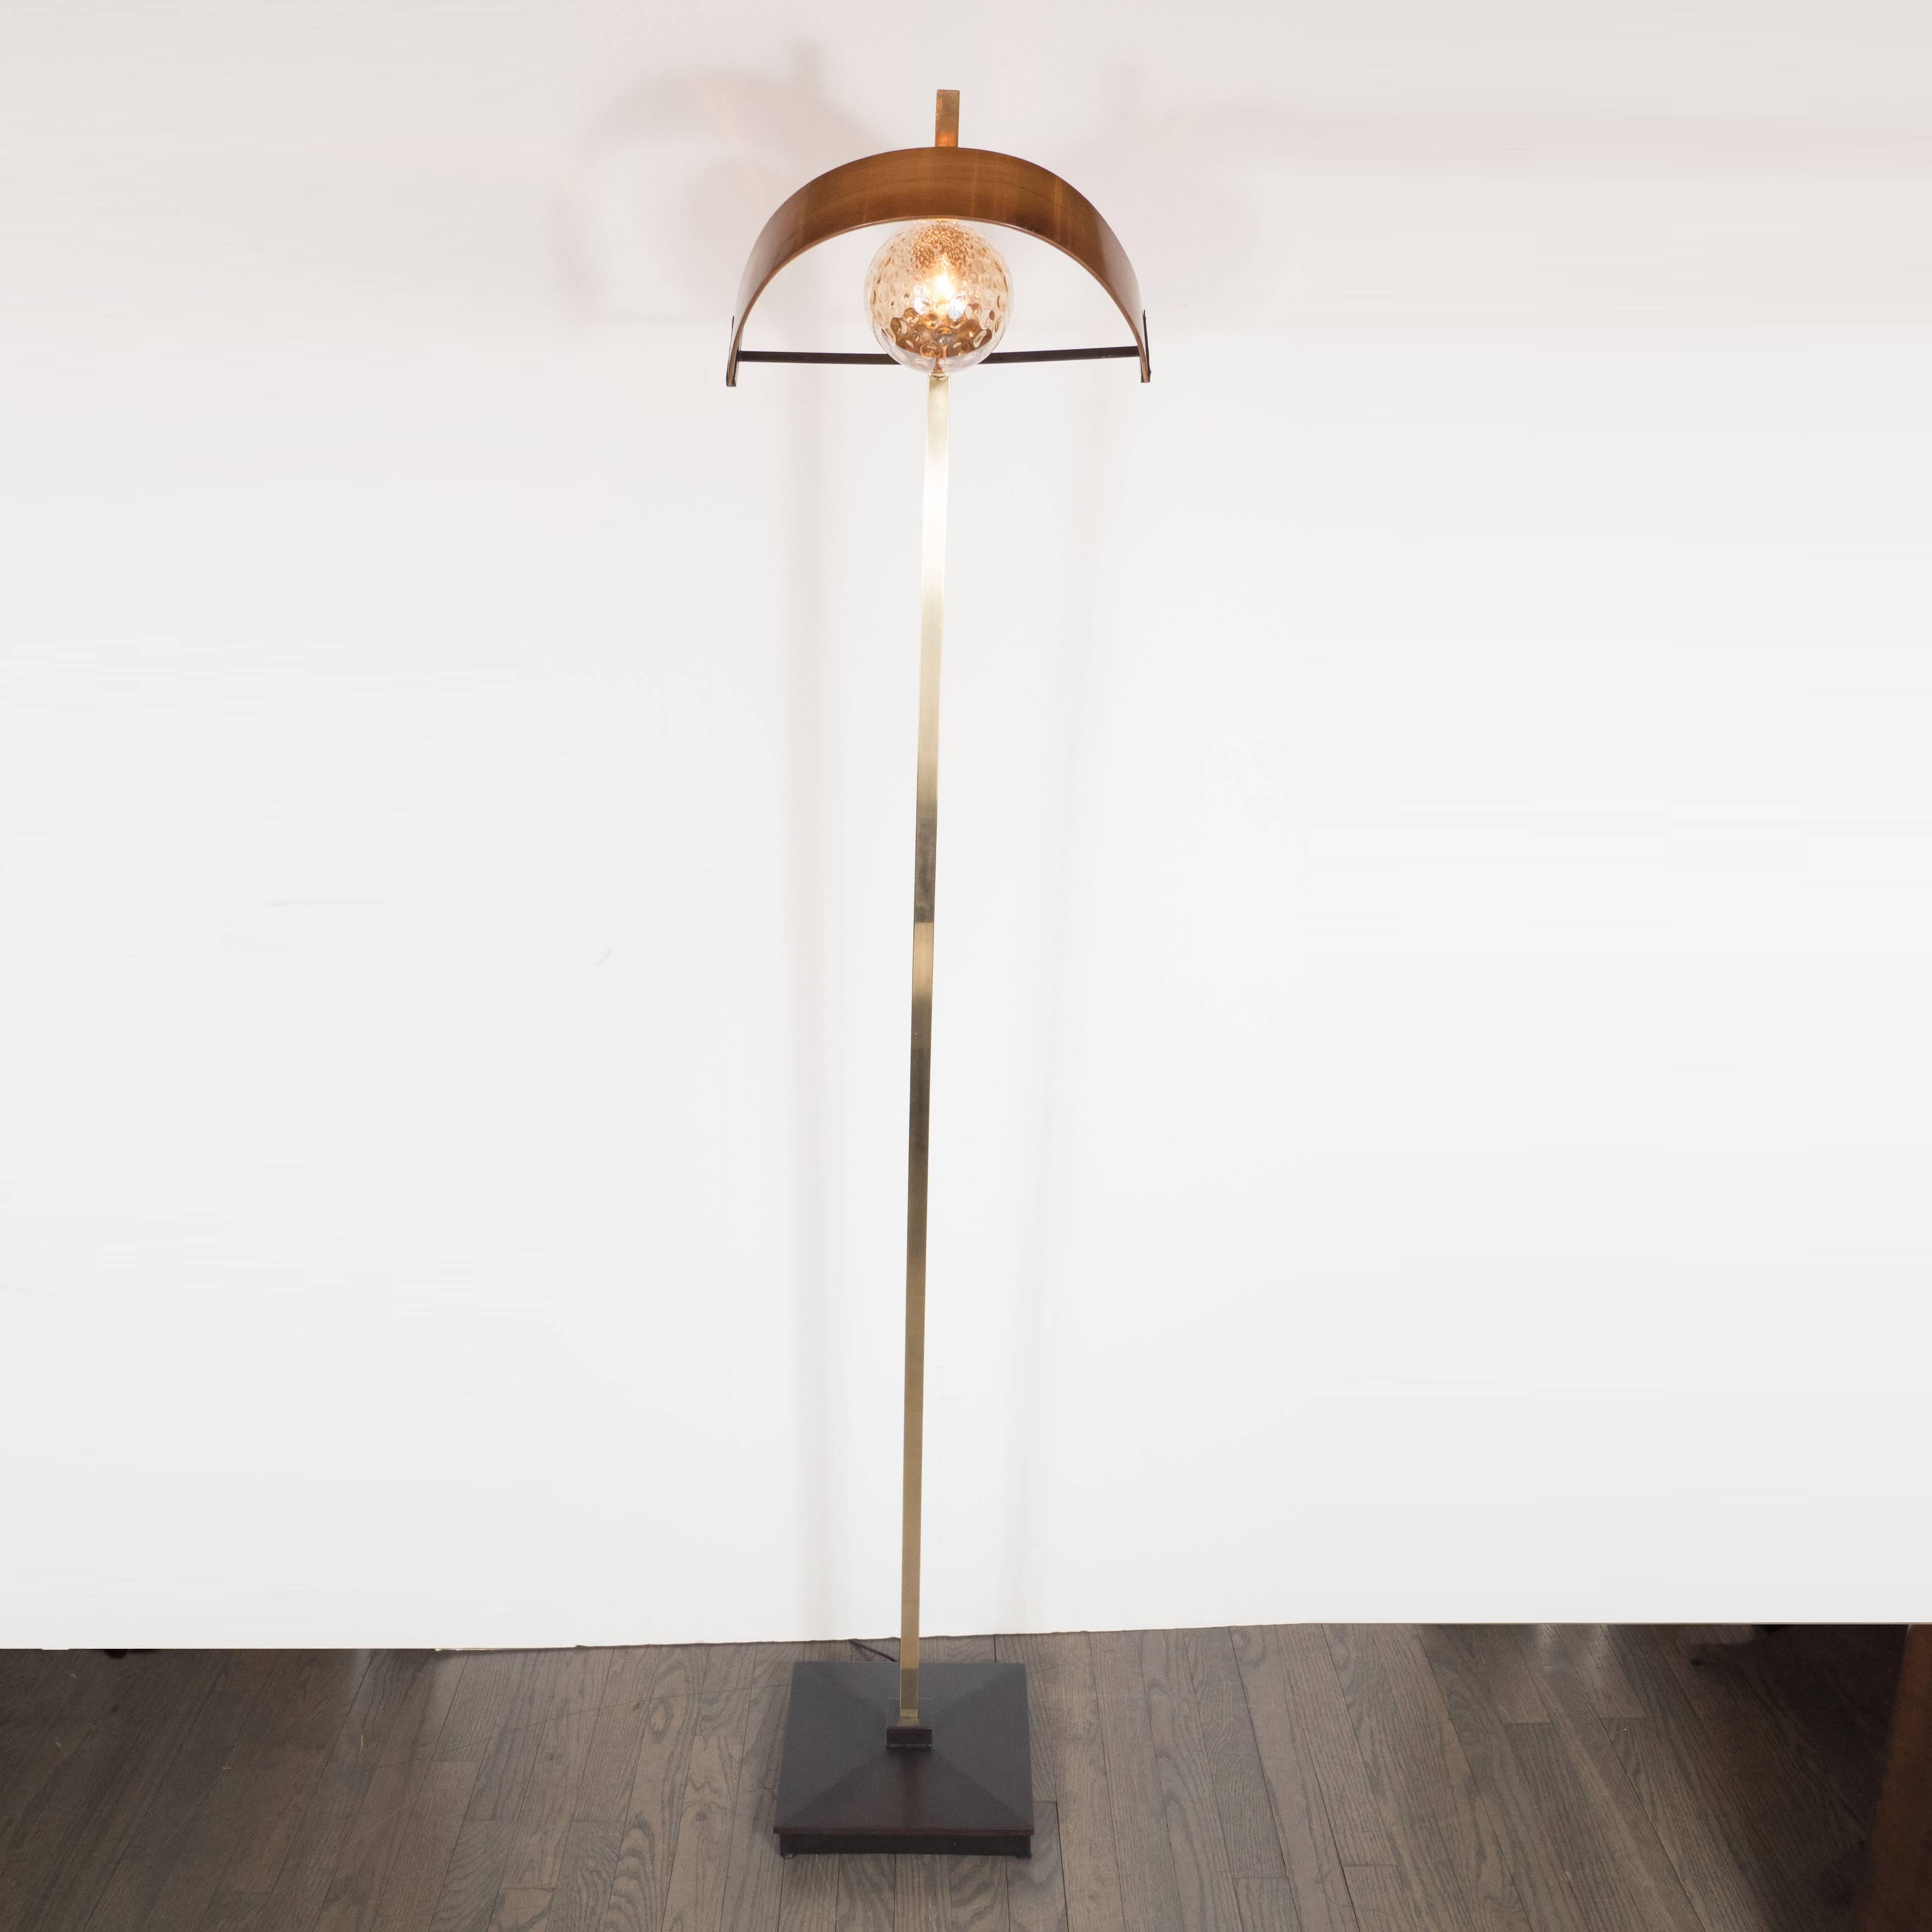 This sophisticated and sculptural floor lamp was realized in Italy, circa 1950. It is composed of an orbital shade in translucent textured glass shielded by an demilune form in hand rubbed walnut which attaches to a rectangular rod in polished